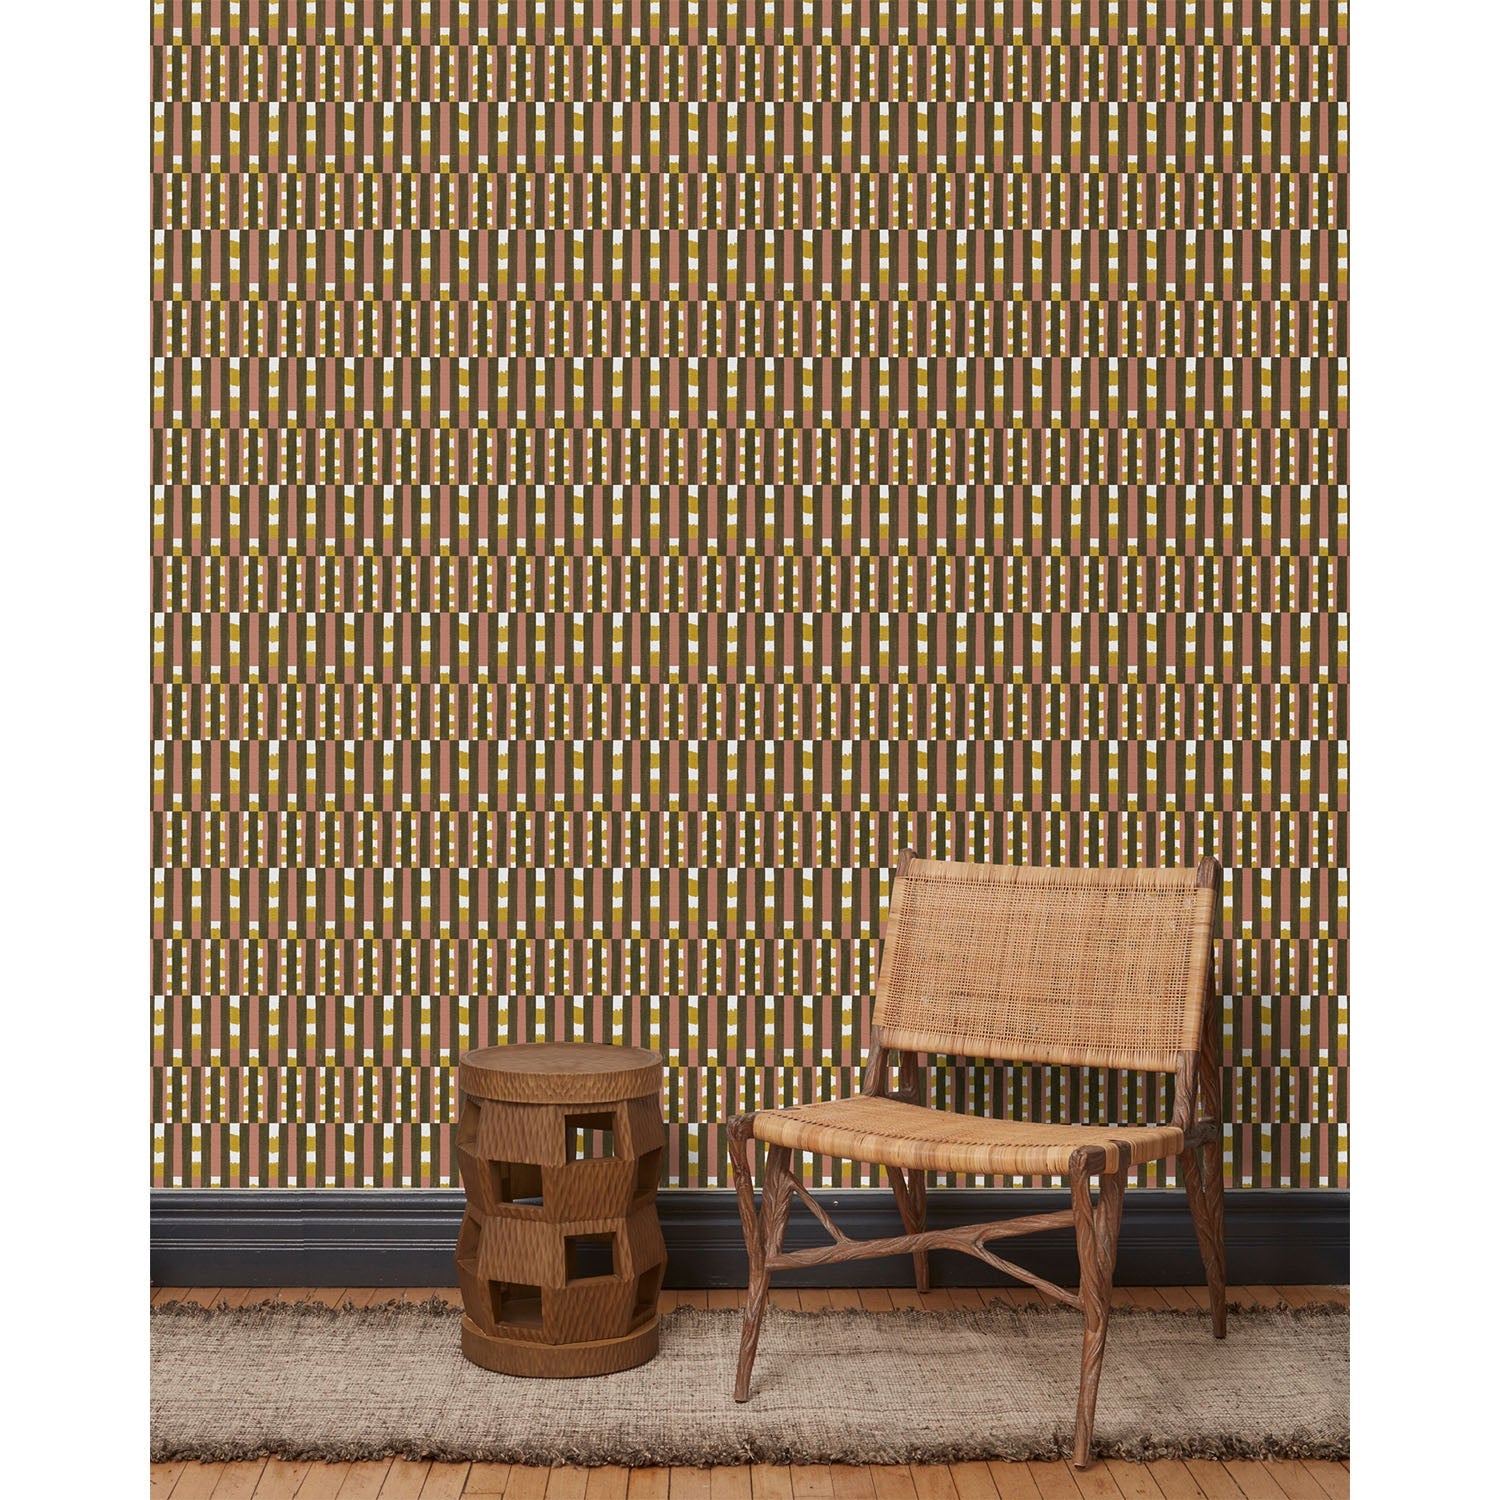 Wood and woven chair, brown stool and rug in front of wallpaper with a pattern of vertical stripes of pink, warm olive green and dashes of yellow and white, hover